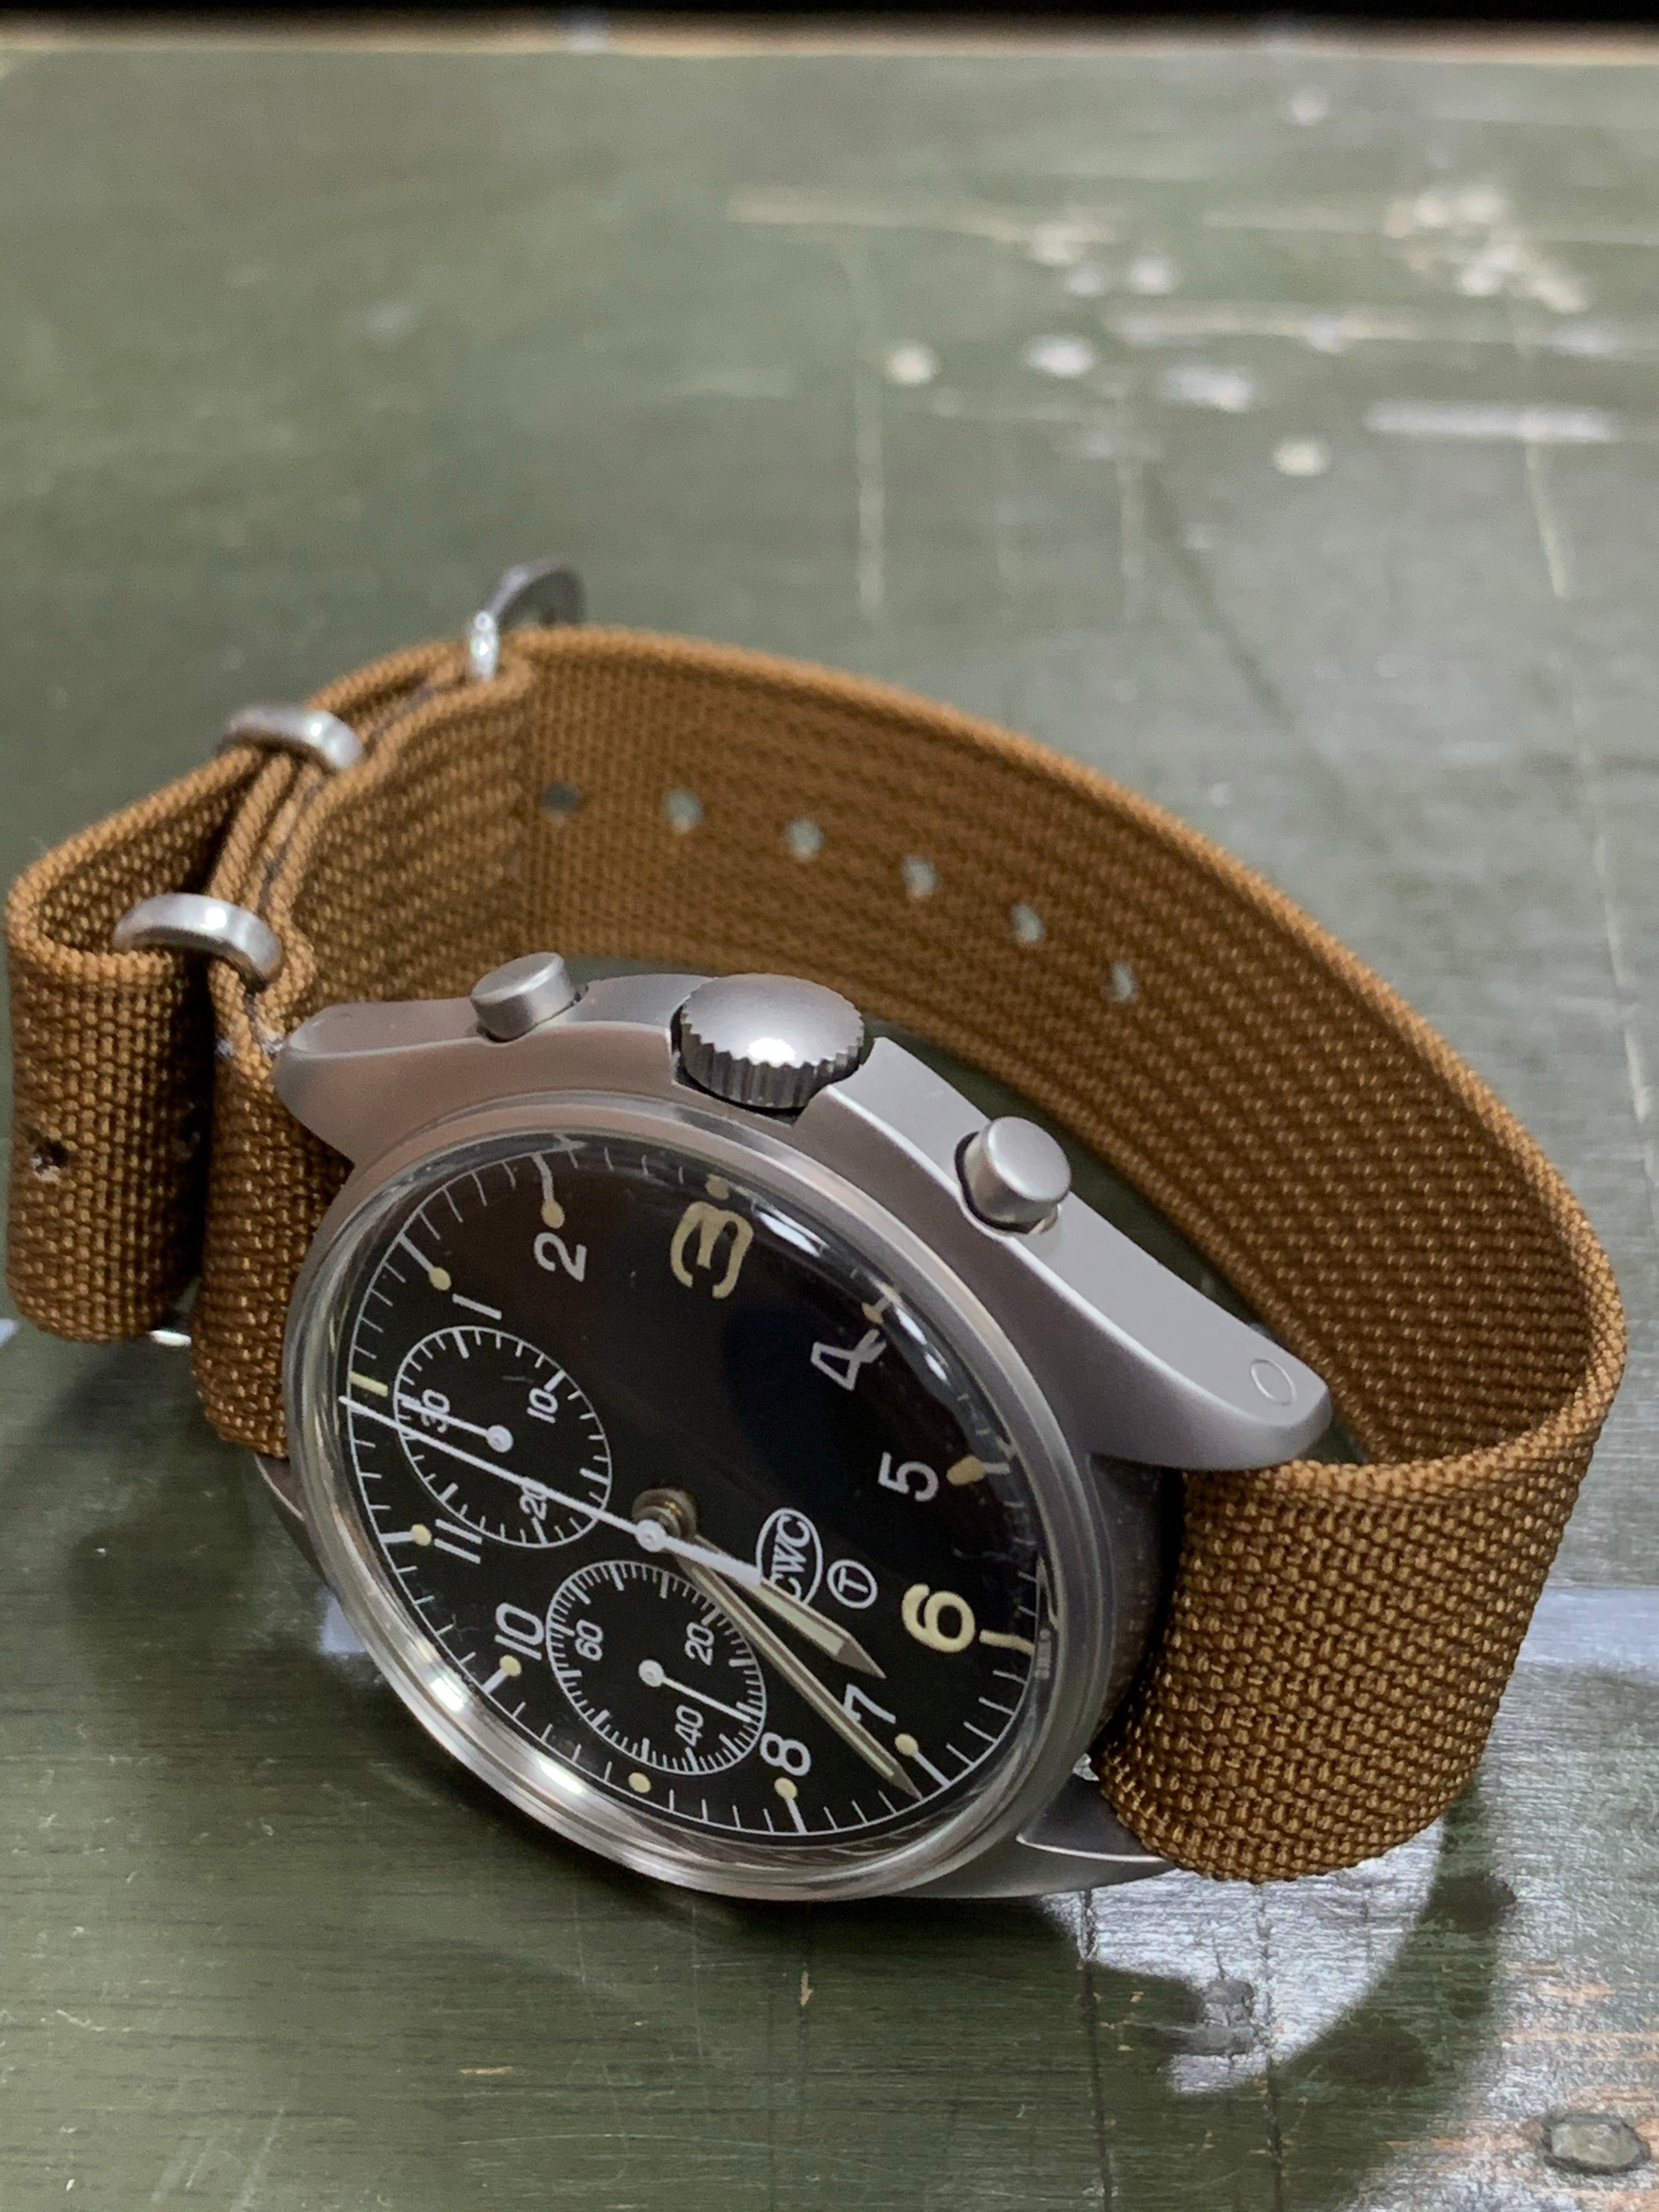 CWC SINGLE PASS RIBBED STRAP ON WATCH